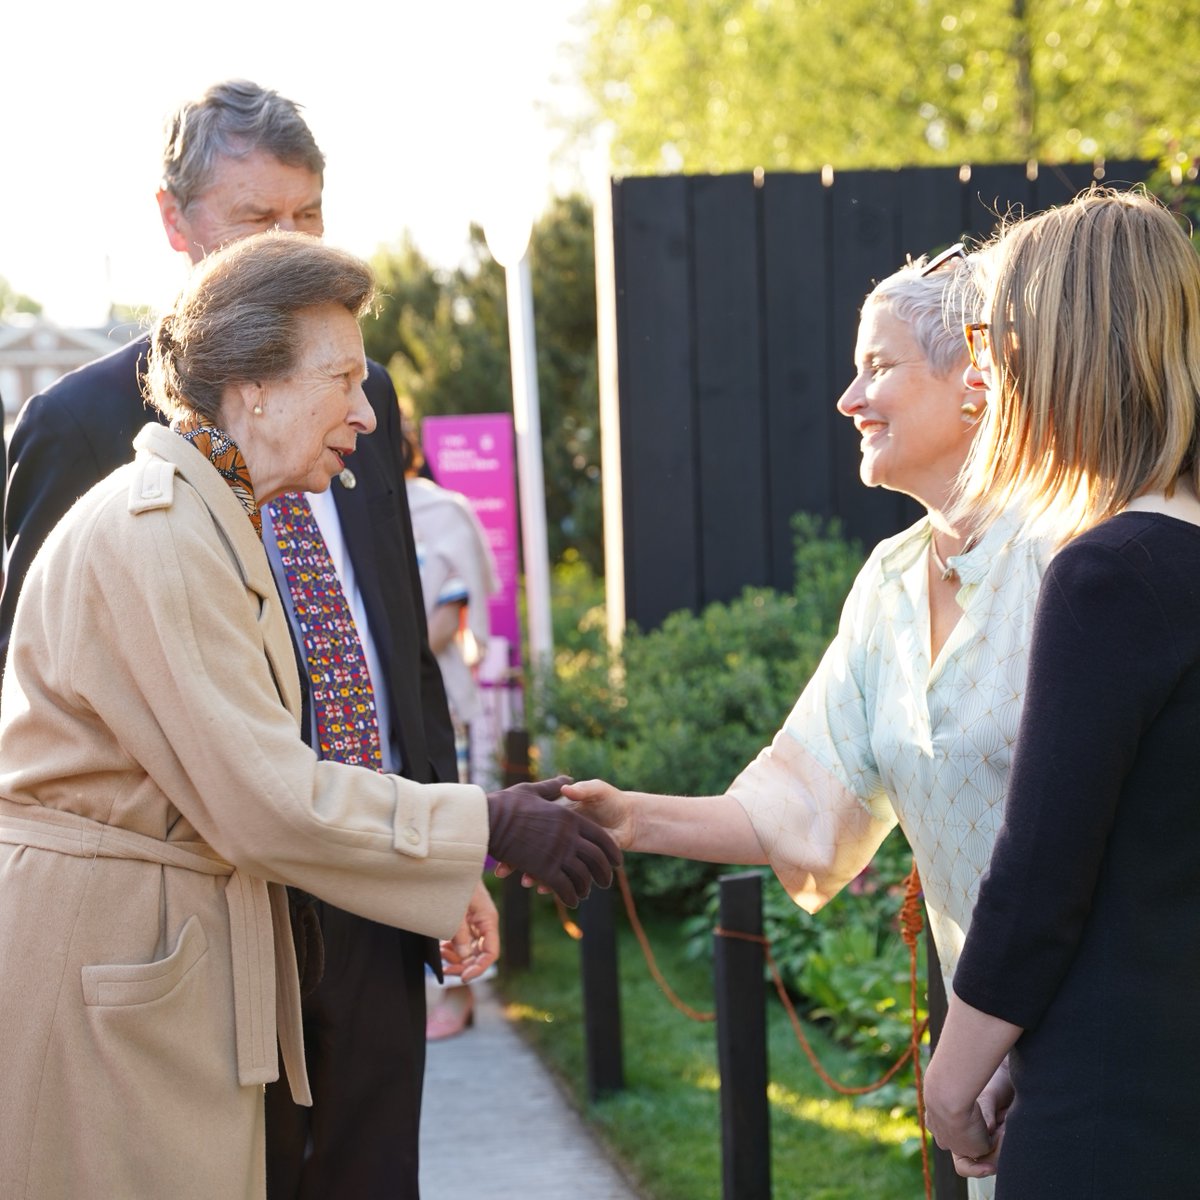 We had the honour of welcoming Her Royal Highness, The Princess Royal and Vice Admiral Sir Timothy Laurence to our Silver Gilt winning garden at #RHSChelsea for a tour by co-designers Sophie Parmenter and Dido Milne: bit.ly/3WVhRfz